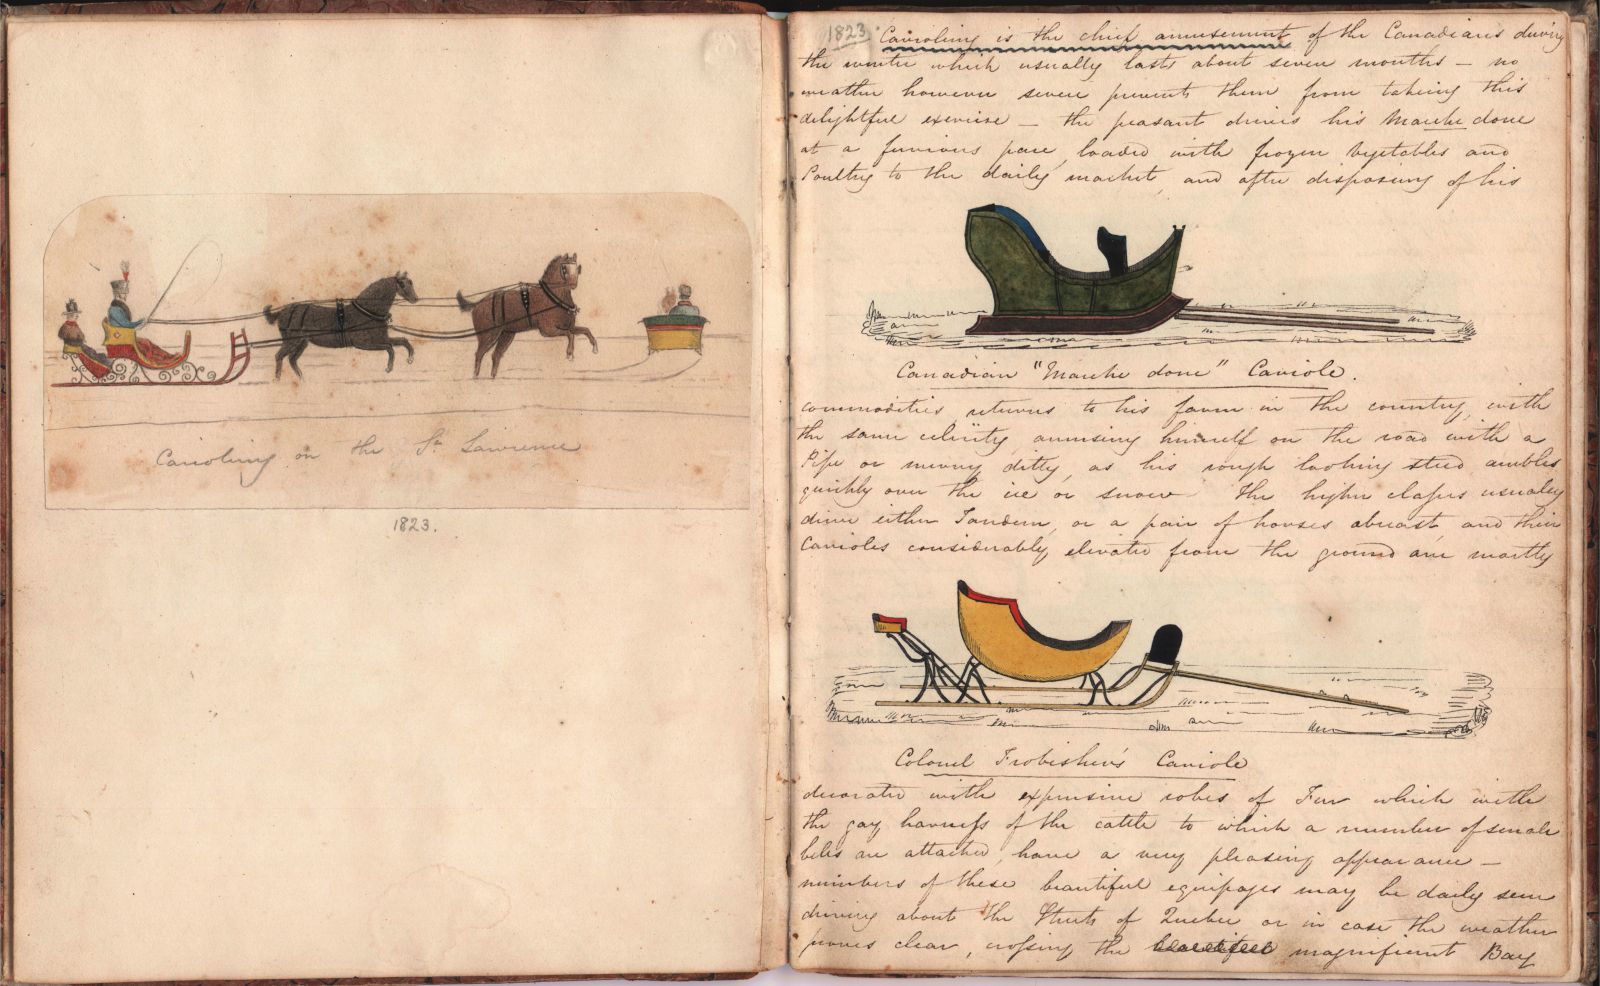 drawings of a sleigh from the Stretton Journal